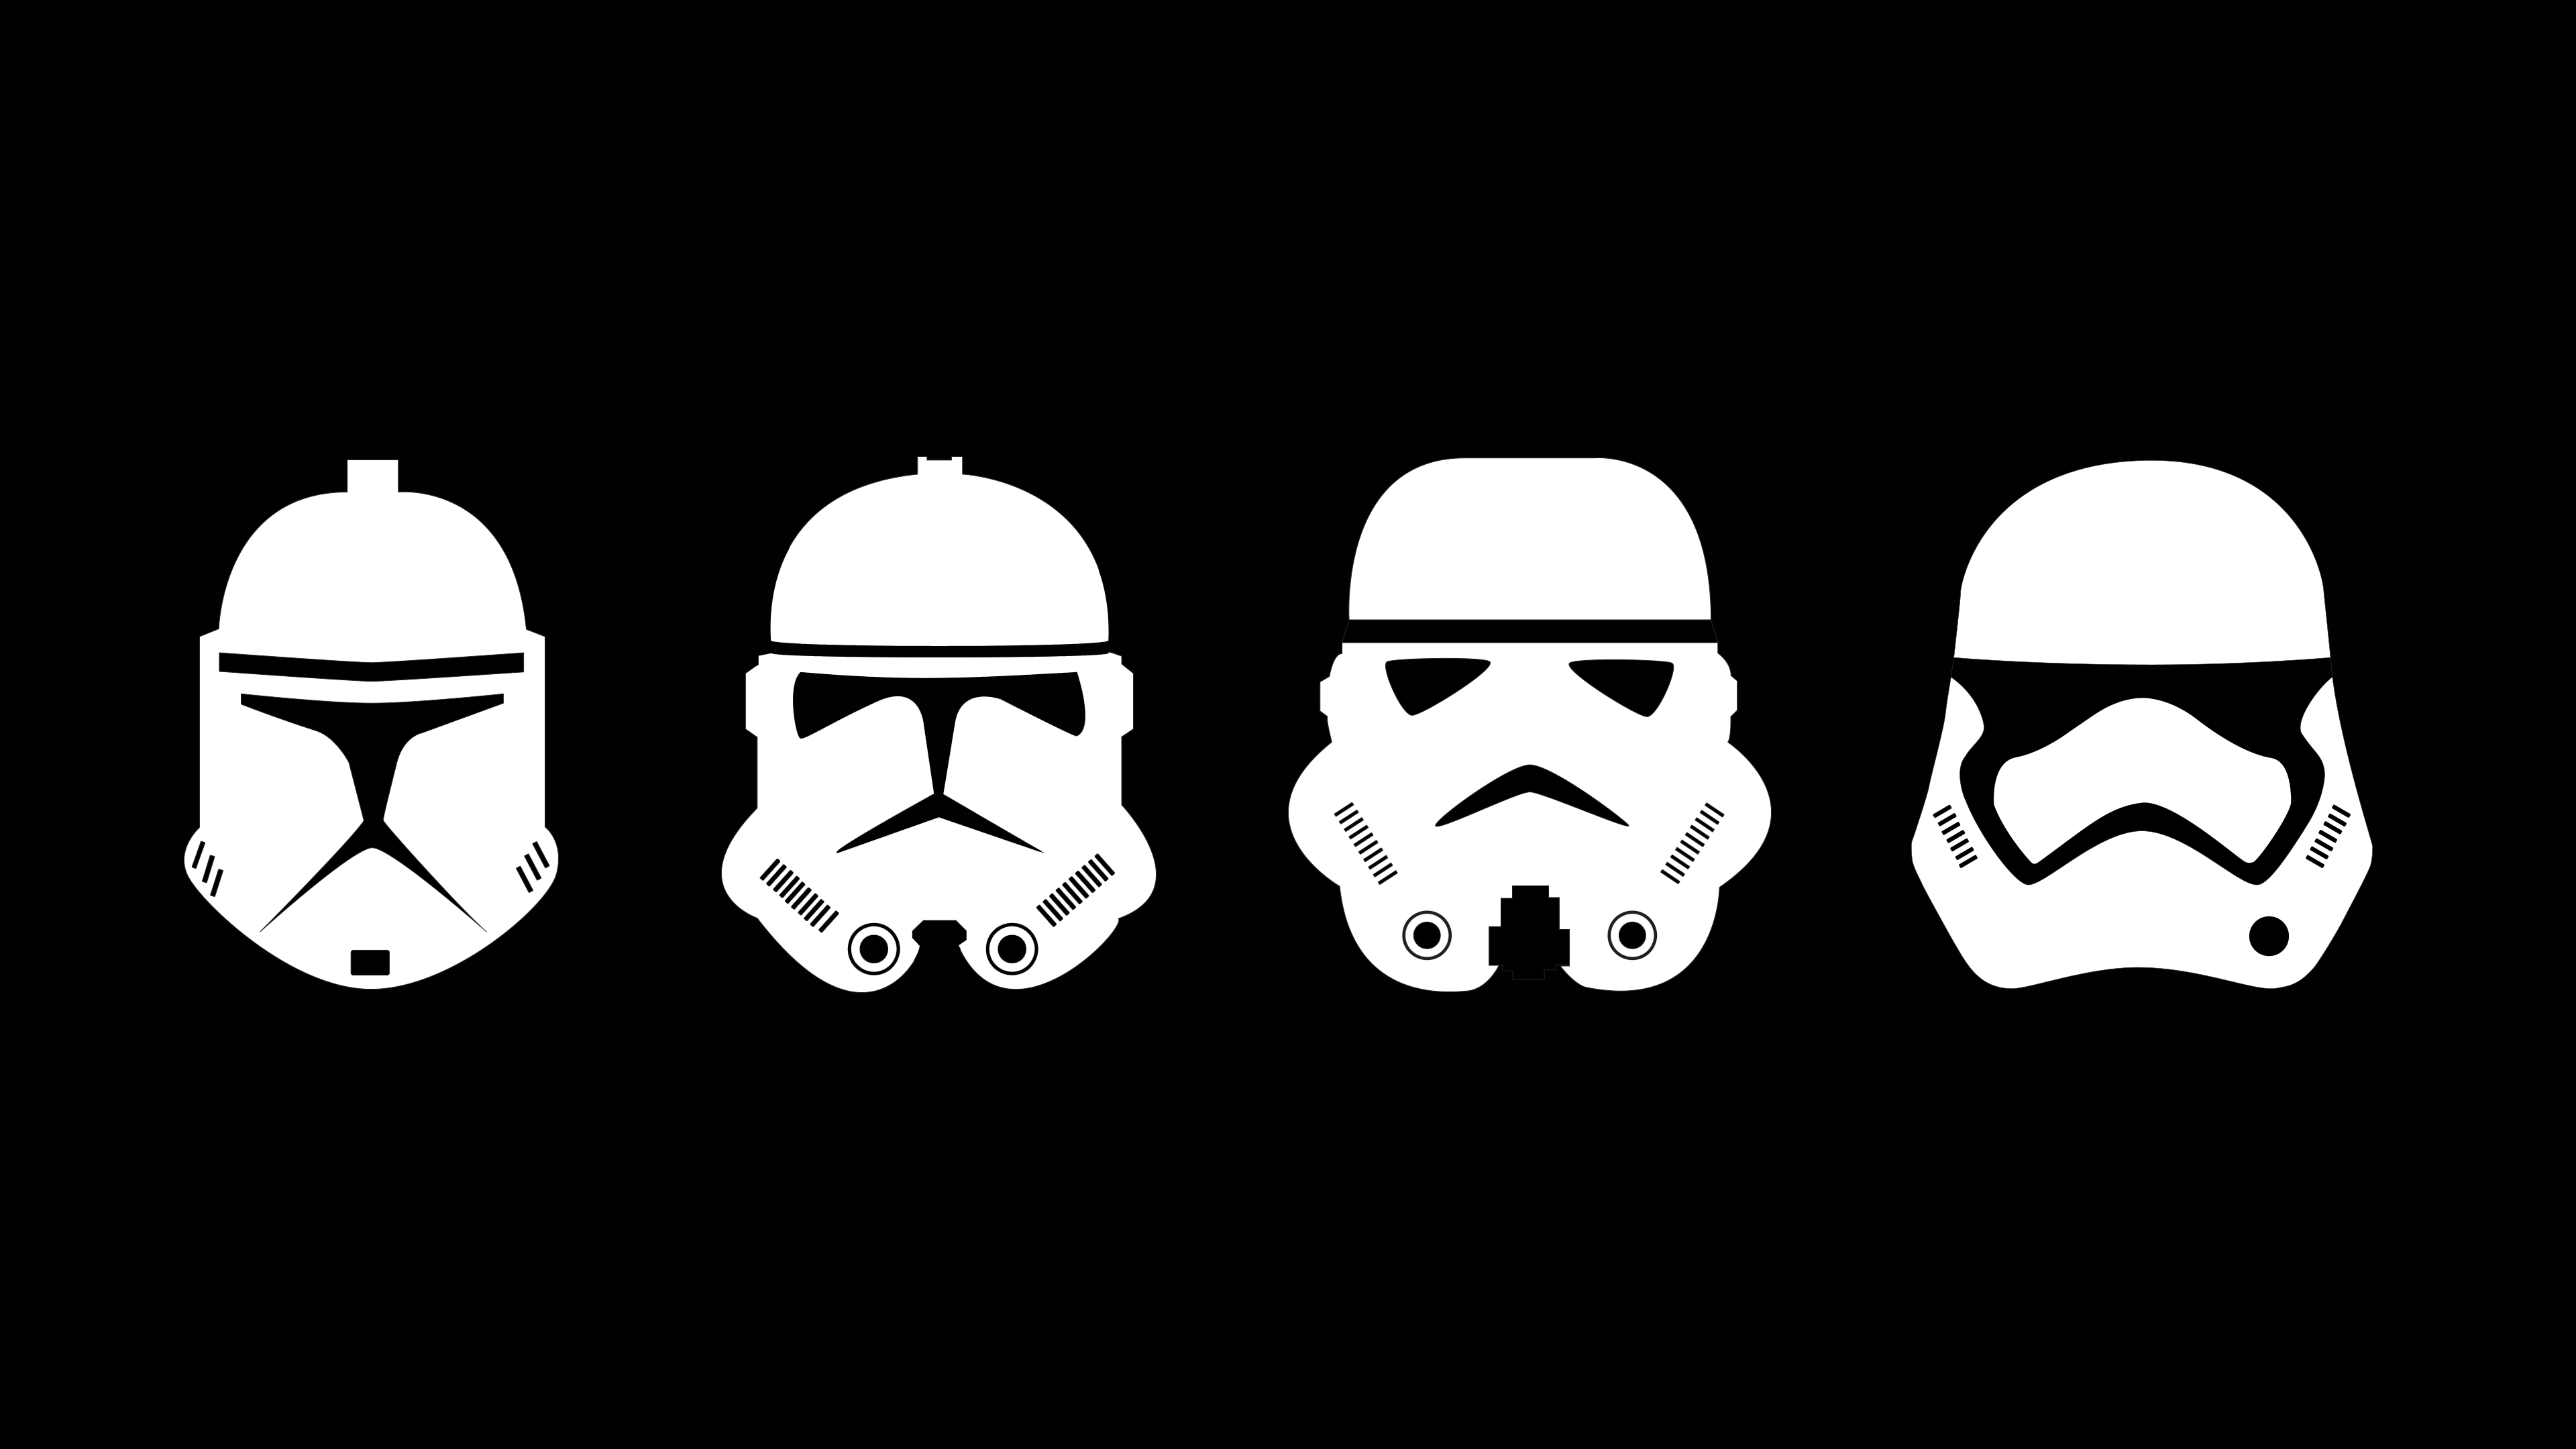 I Made A Minimal Wallpaper Of The Clone Png Image Pngio